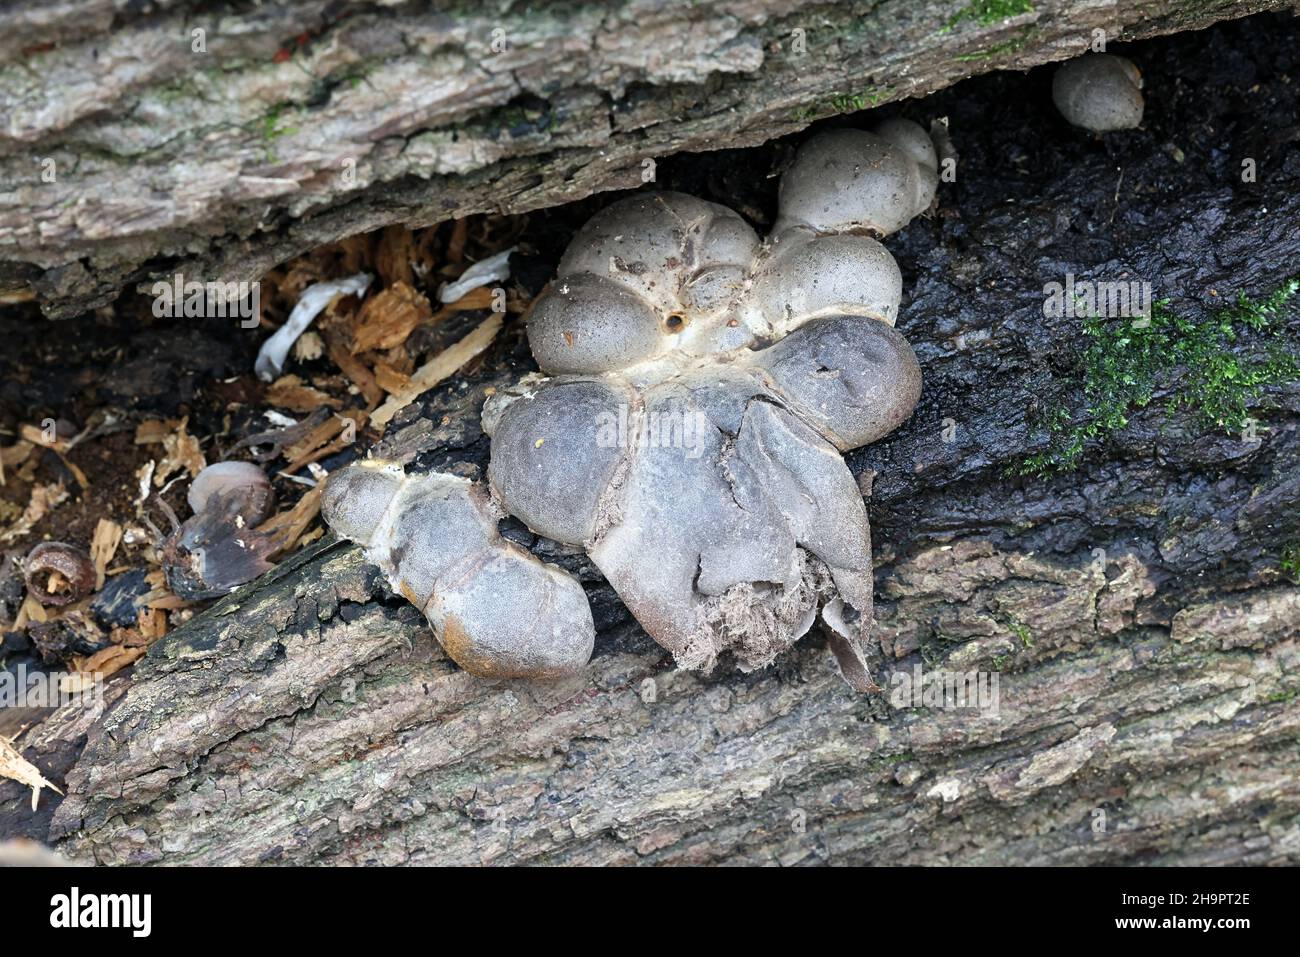 Lycogala flavofuscum, a slime mold from Finland, no common English name Stock Photo